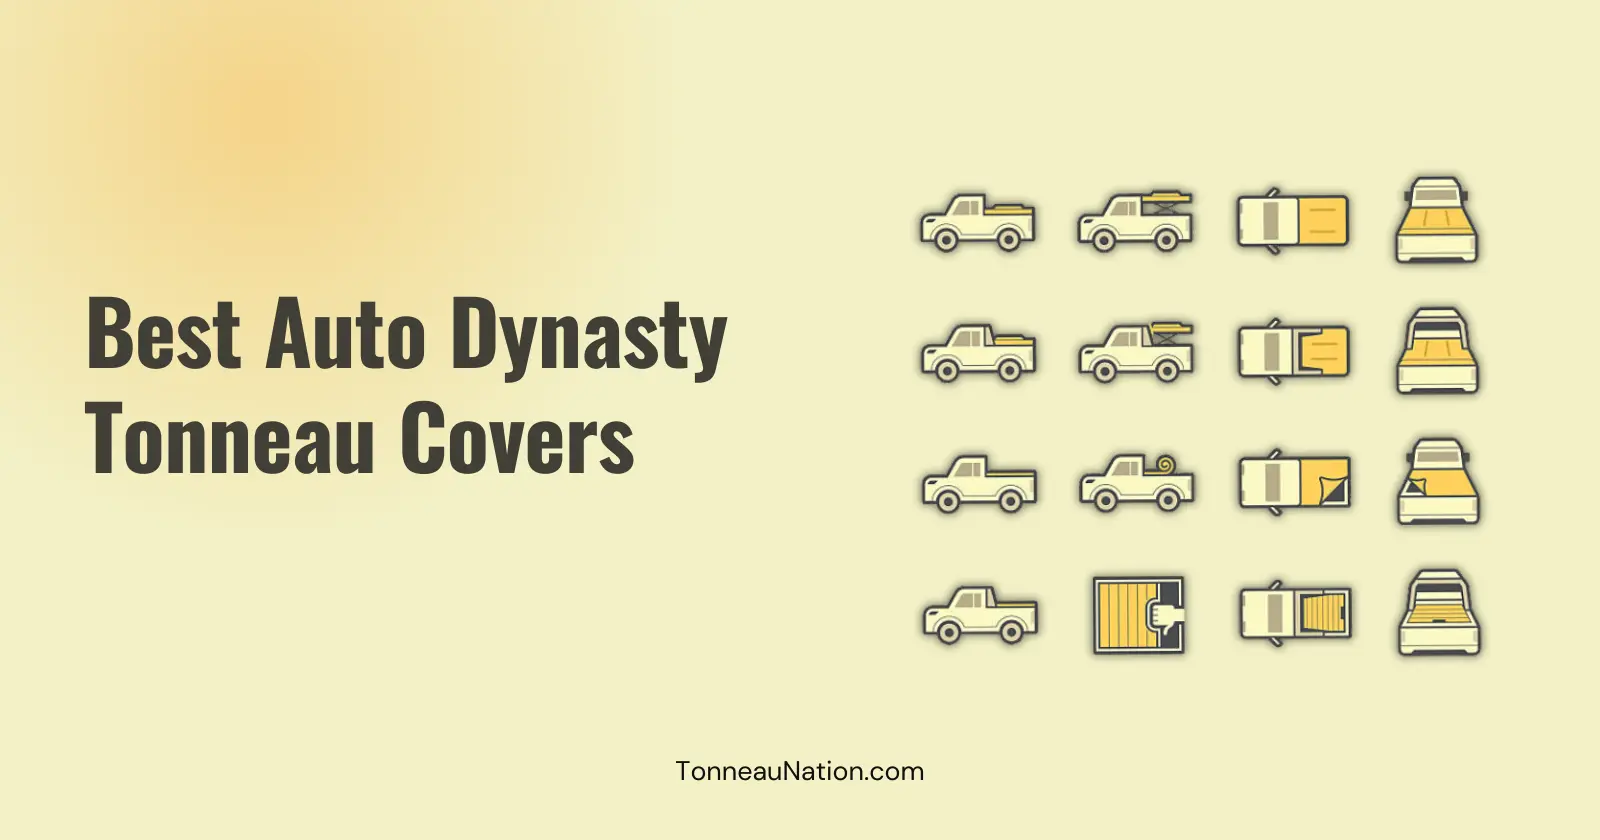 Tonneau cover from Auto Dynasty brand